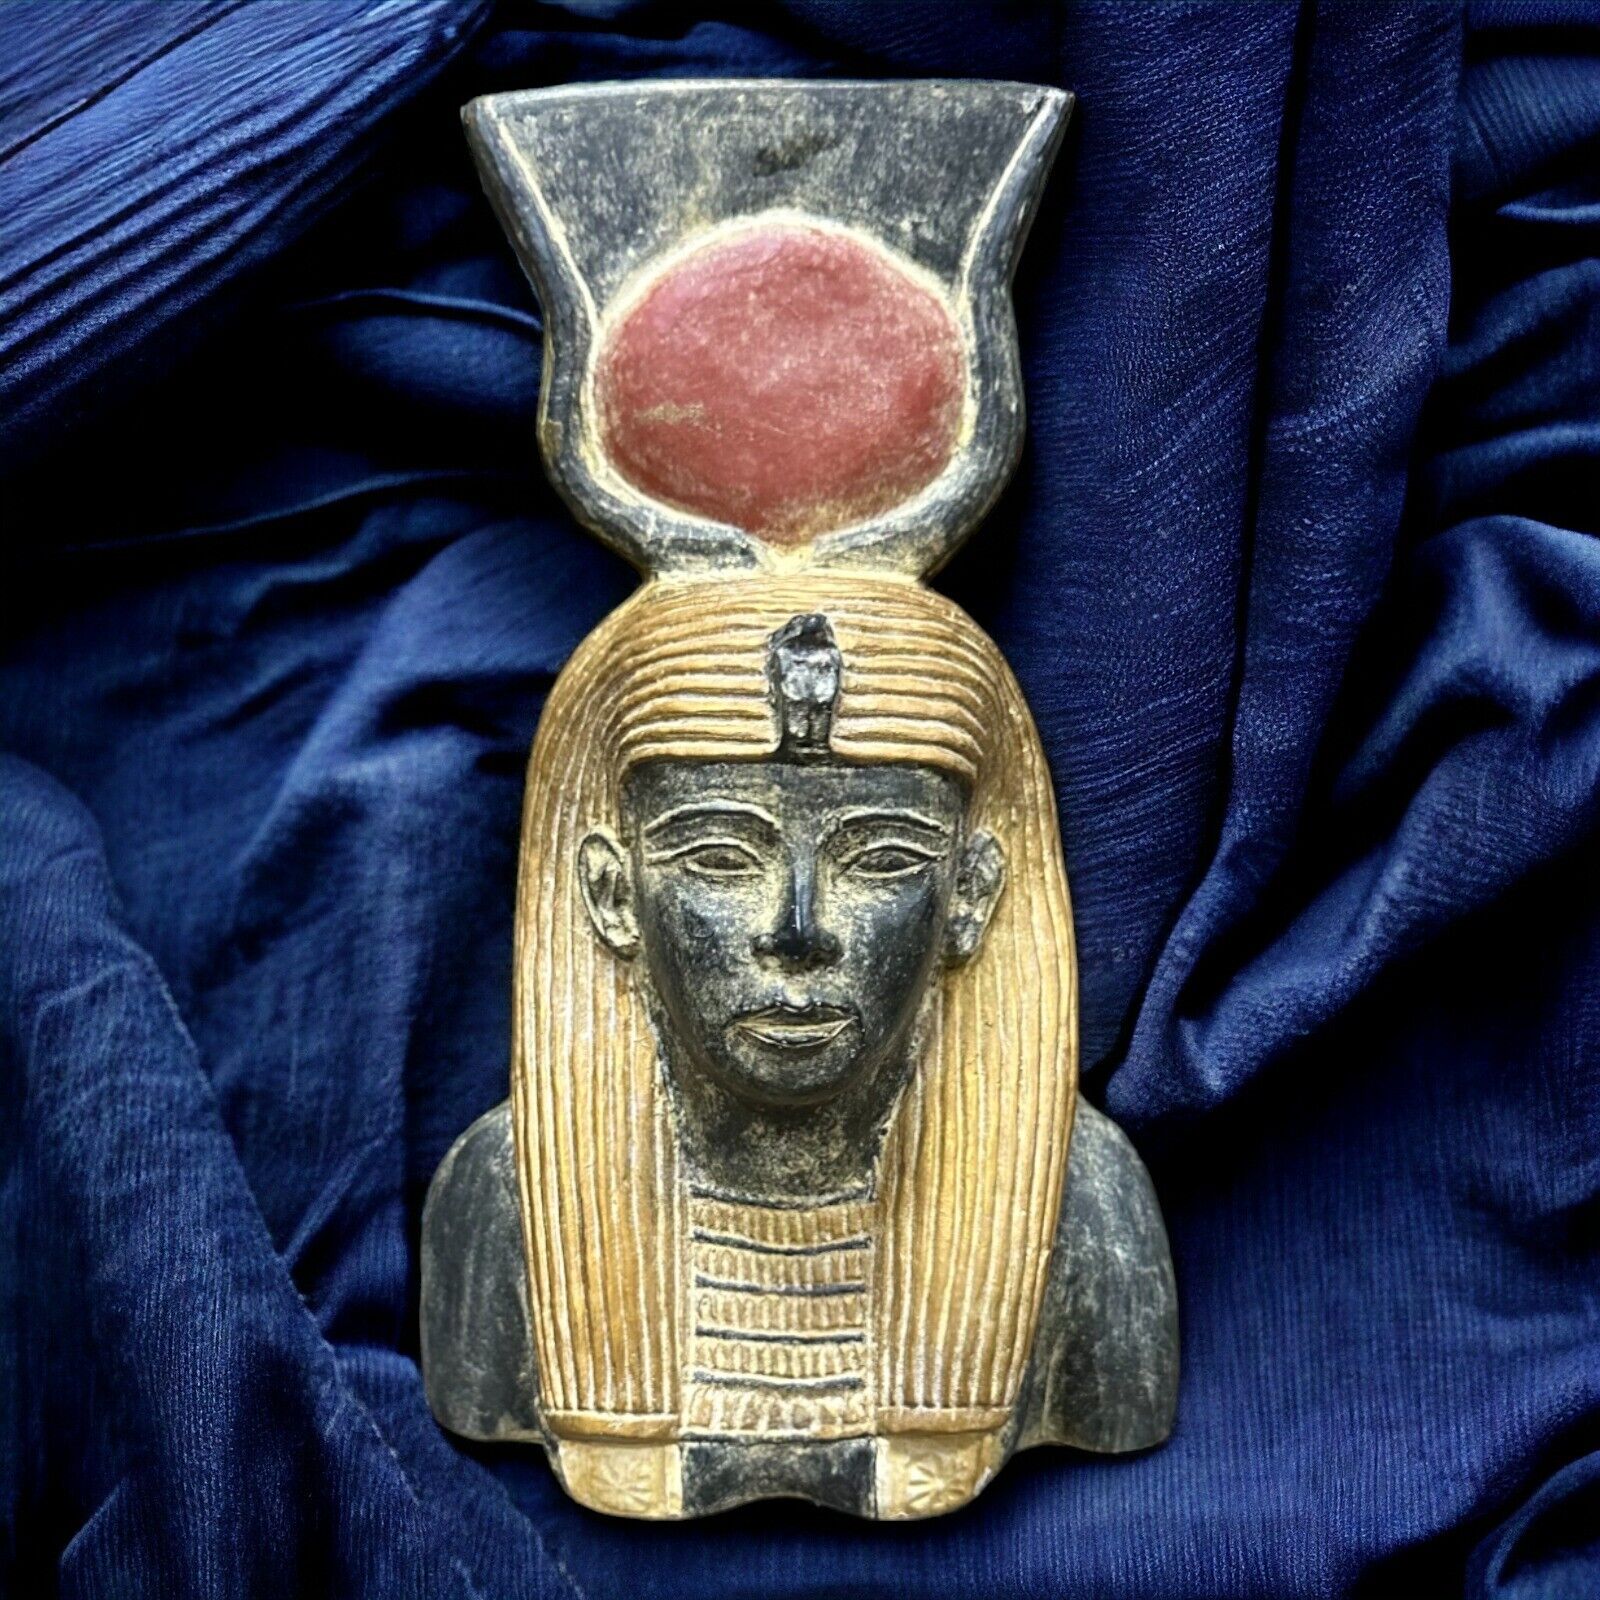 Ancient Egyptian Antiques Queen Nefertari daughter of Queen Ahhotep Pharaonic BC